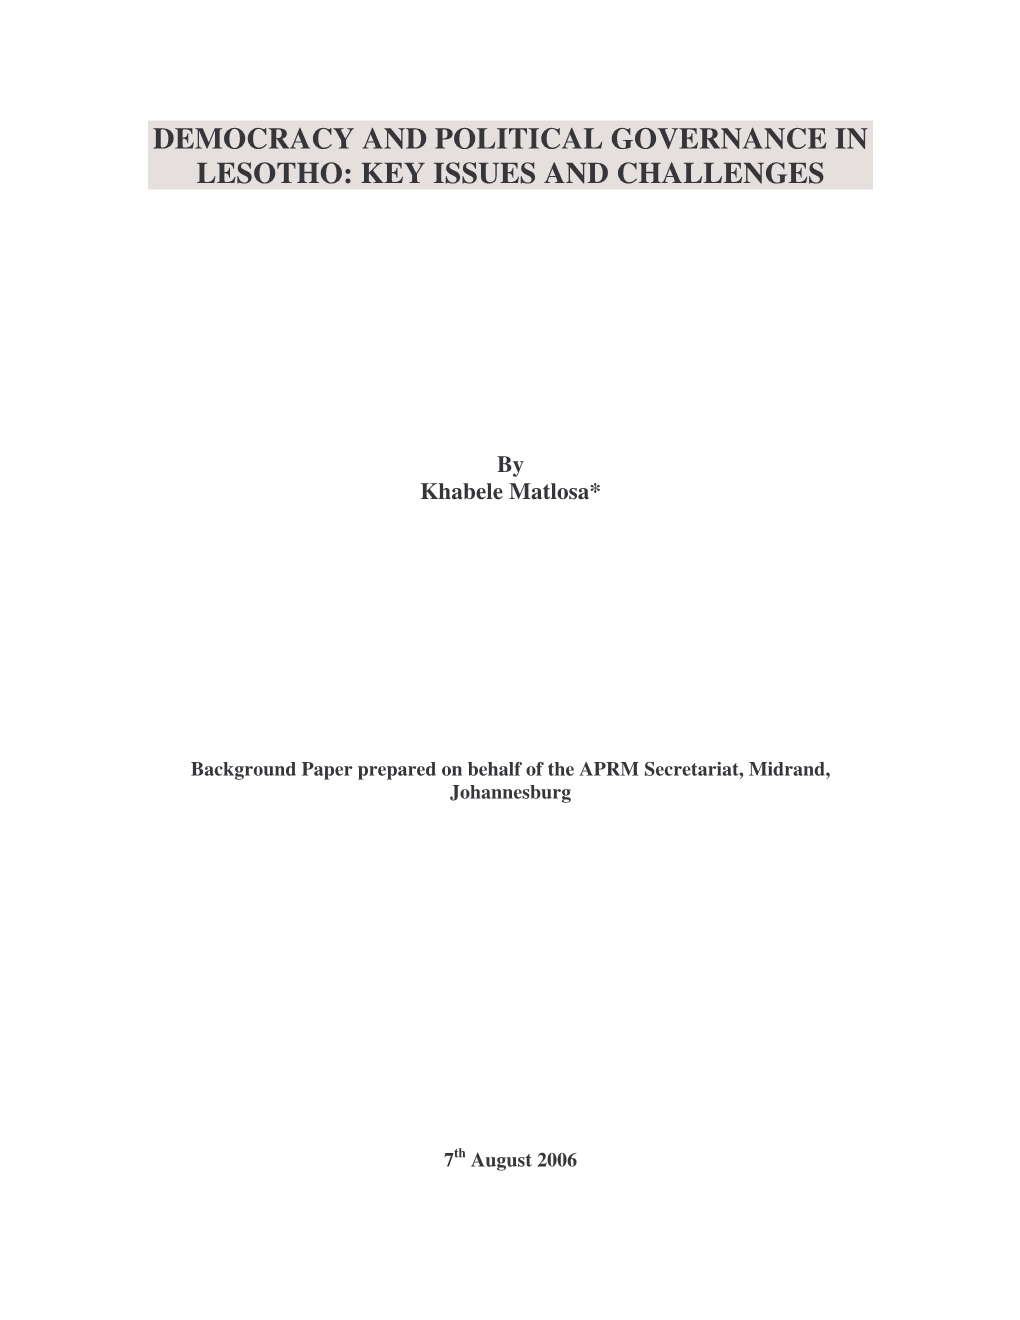 Democracy and Political Governance in Lesotho: Key Issues and Challenges